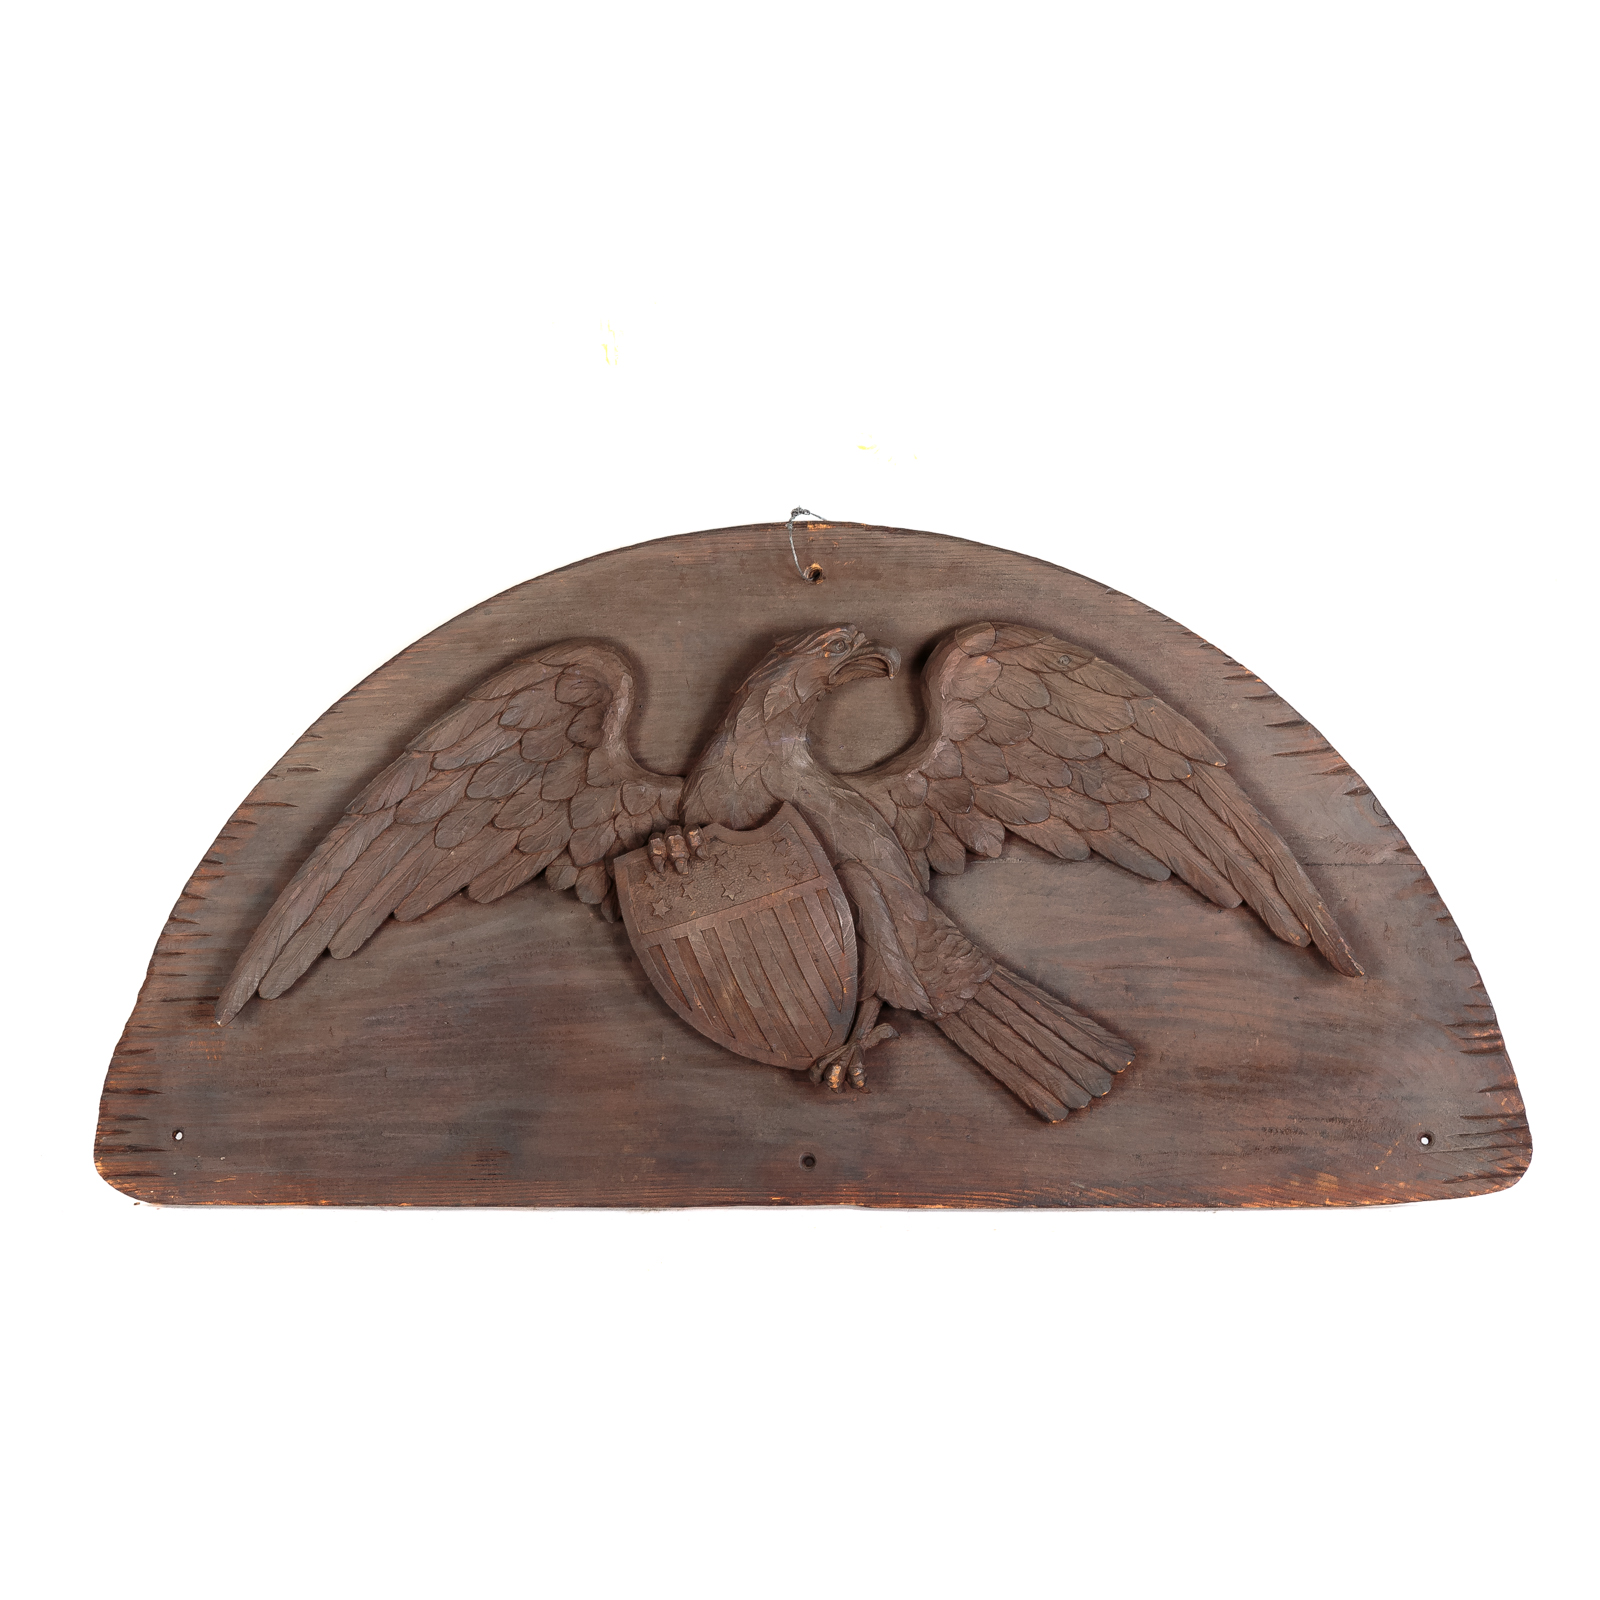 AMERICAN CARVED WOOD EAGLE PLAQUE 2888a1